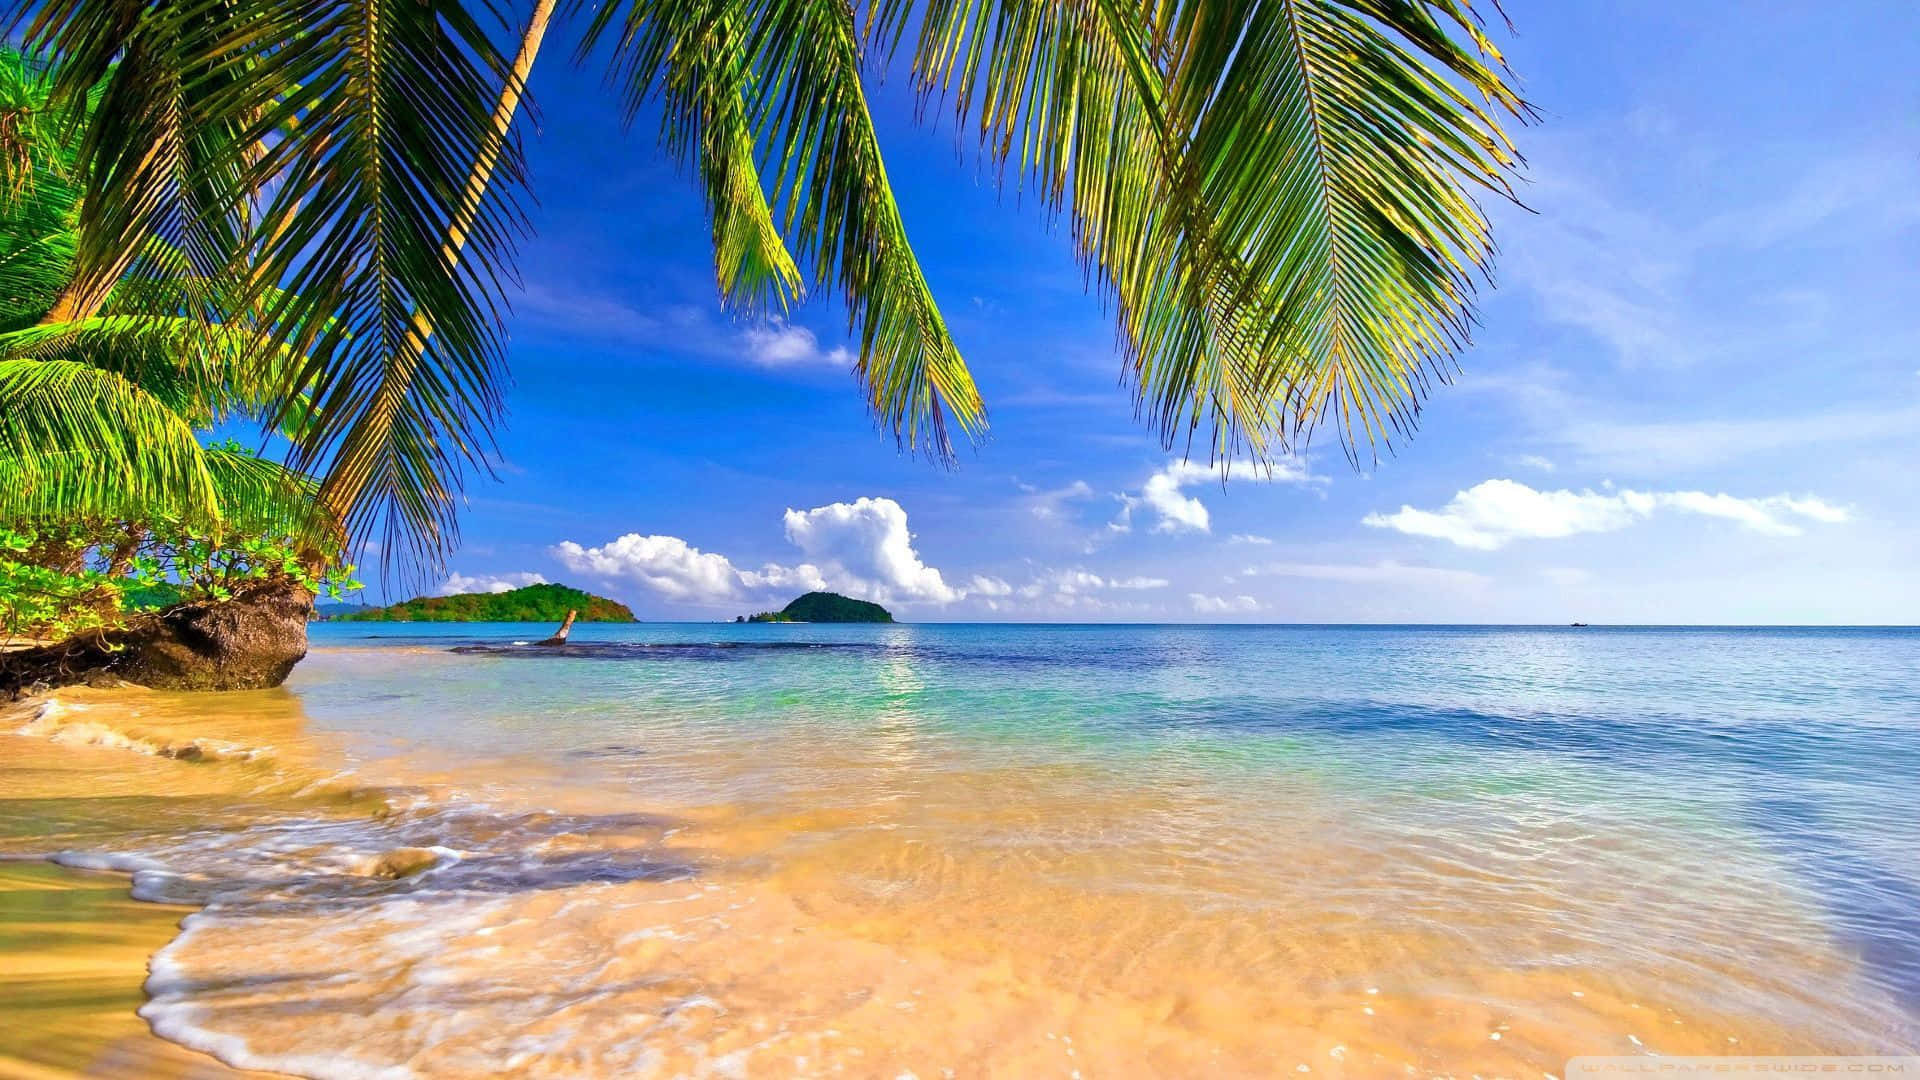 A Beach With Palm Trees And Blue Water Wallpaper